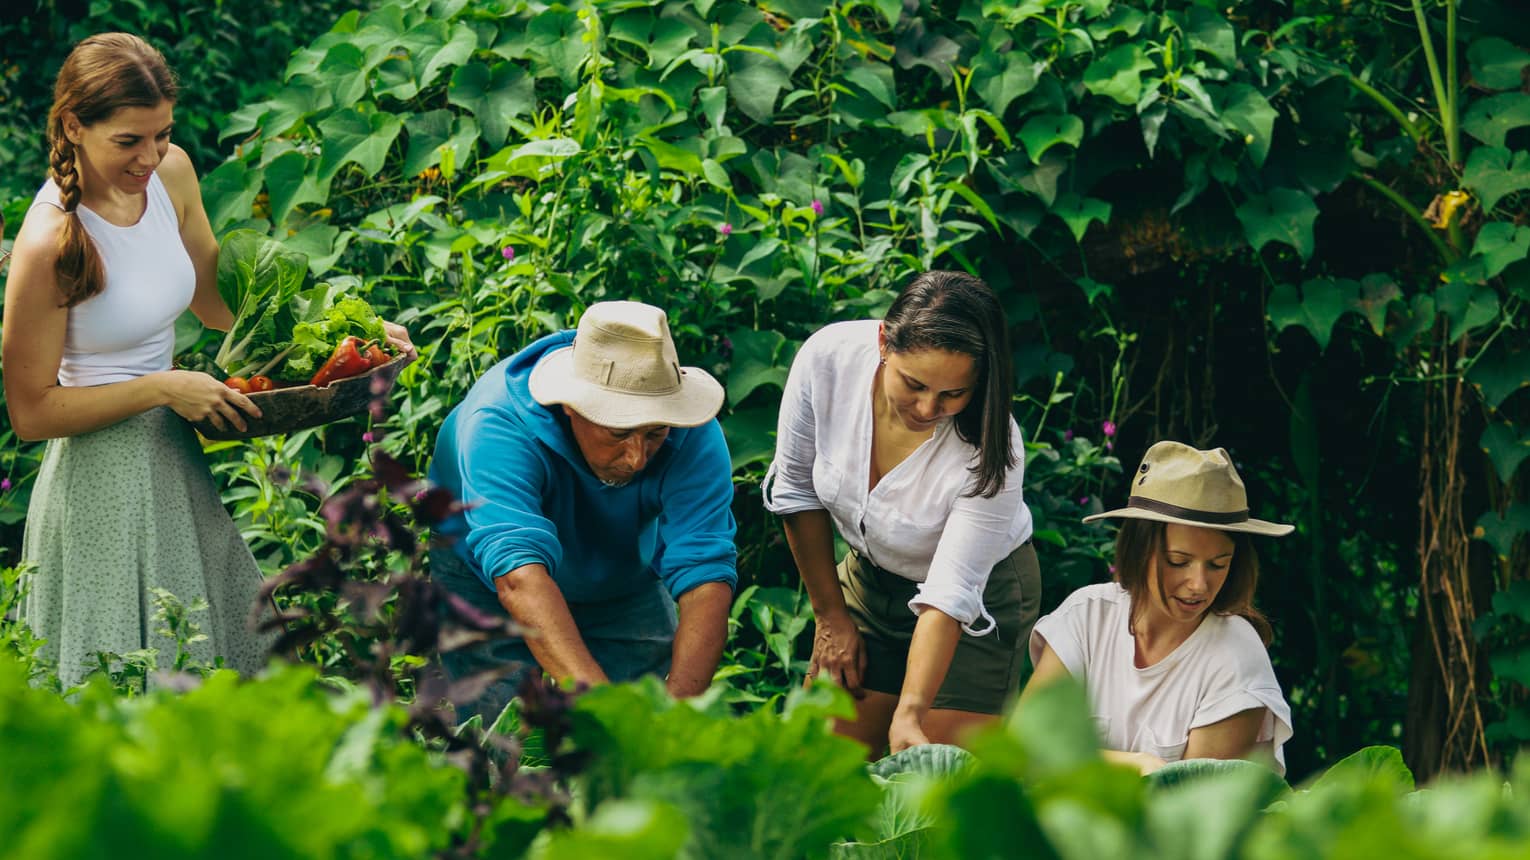 This image depicts people harvesting vegetables from a farm and is connected to sustainability and ESG